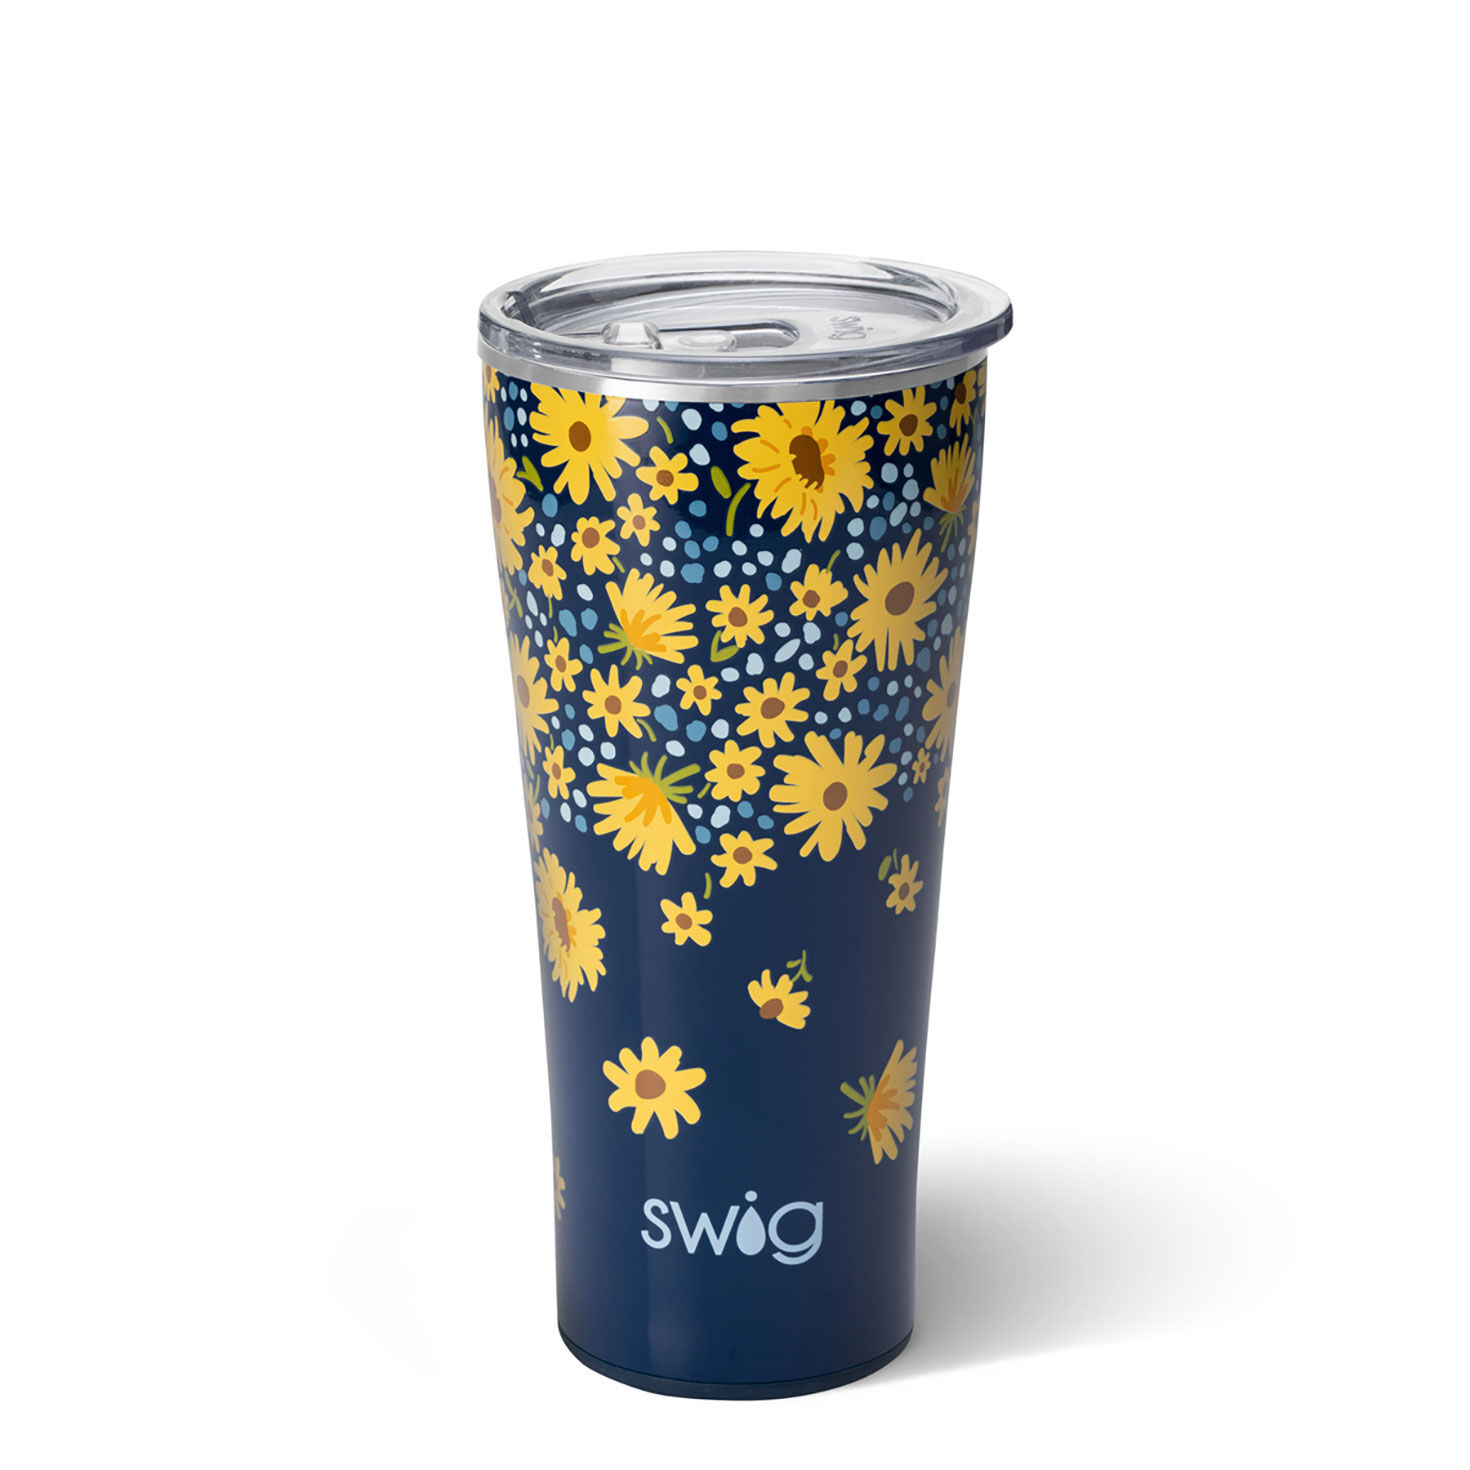 https://www.hallmark.com/dw/image/v2/AALB_PRD/on/demandware.static/-/Sites-hallmark-master/default/dwd0b0c4c9/images/finished-goods/products/S102C32LD/Yellow-Daisies-on-Blue-Insulated-Cup-With-Lid_S102C32LD_01.jpg?sfrm=jpg